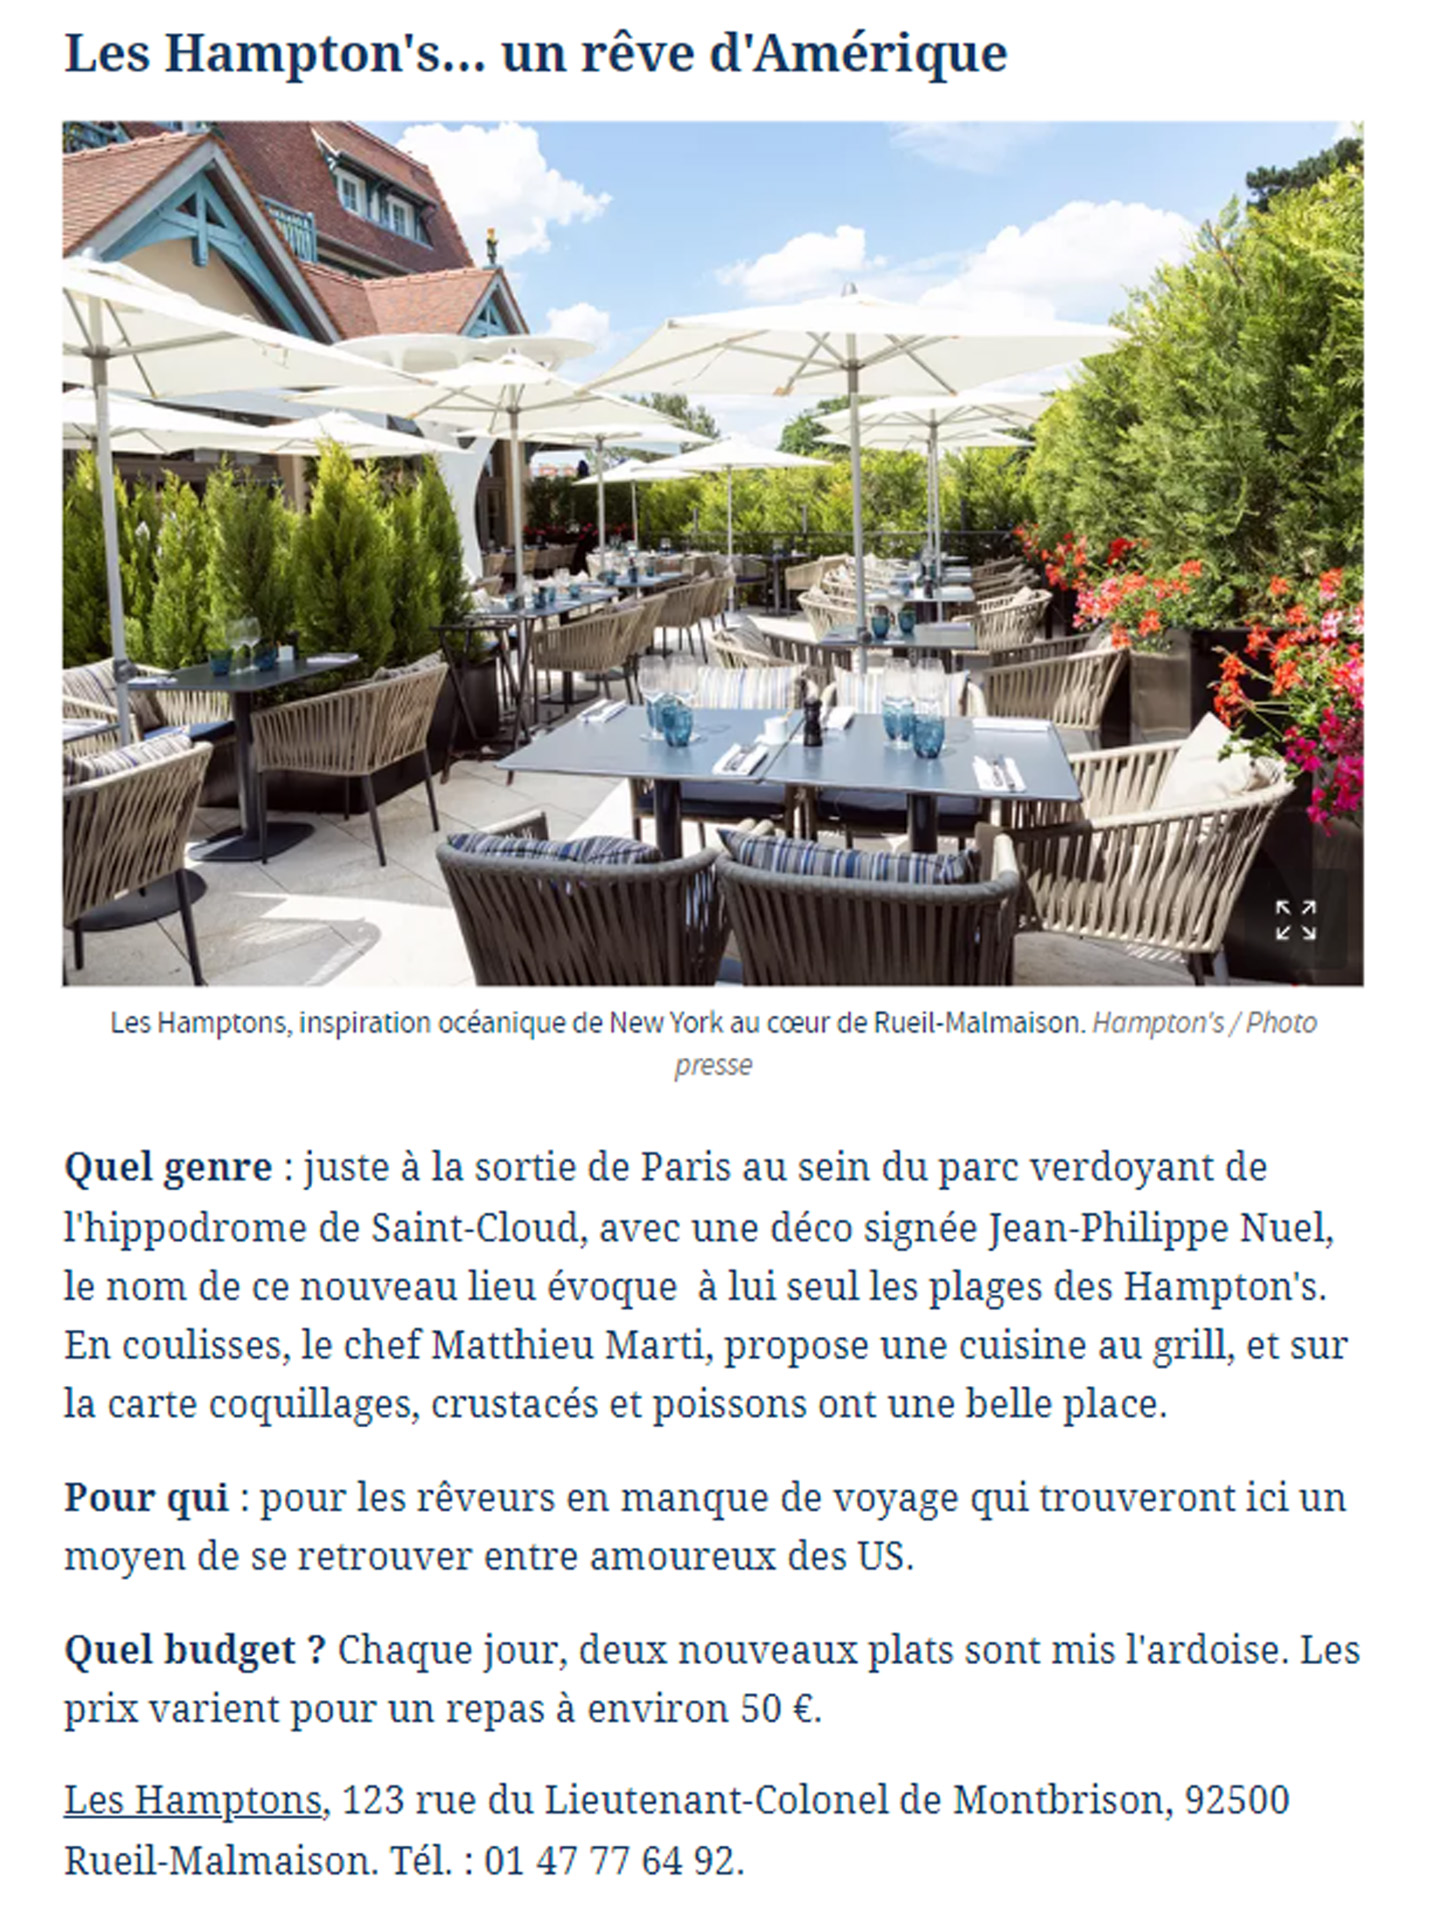 article on the restaurant Les Hamptons Grill realized by the studio jean-philippe nuel, interior architecture, luxury hotel, interior design